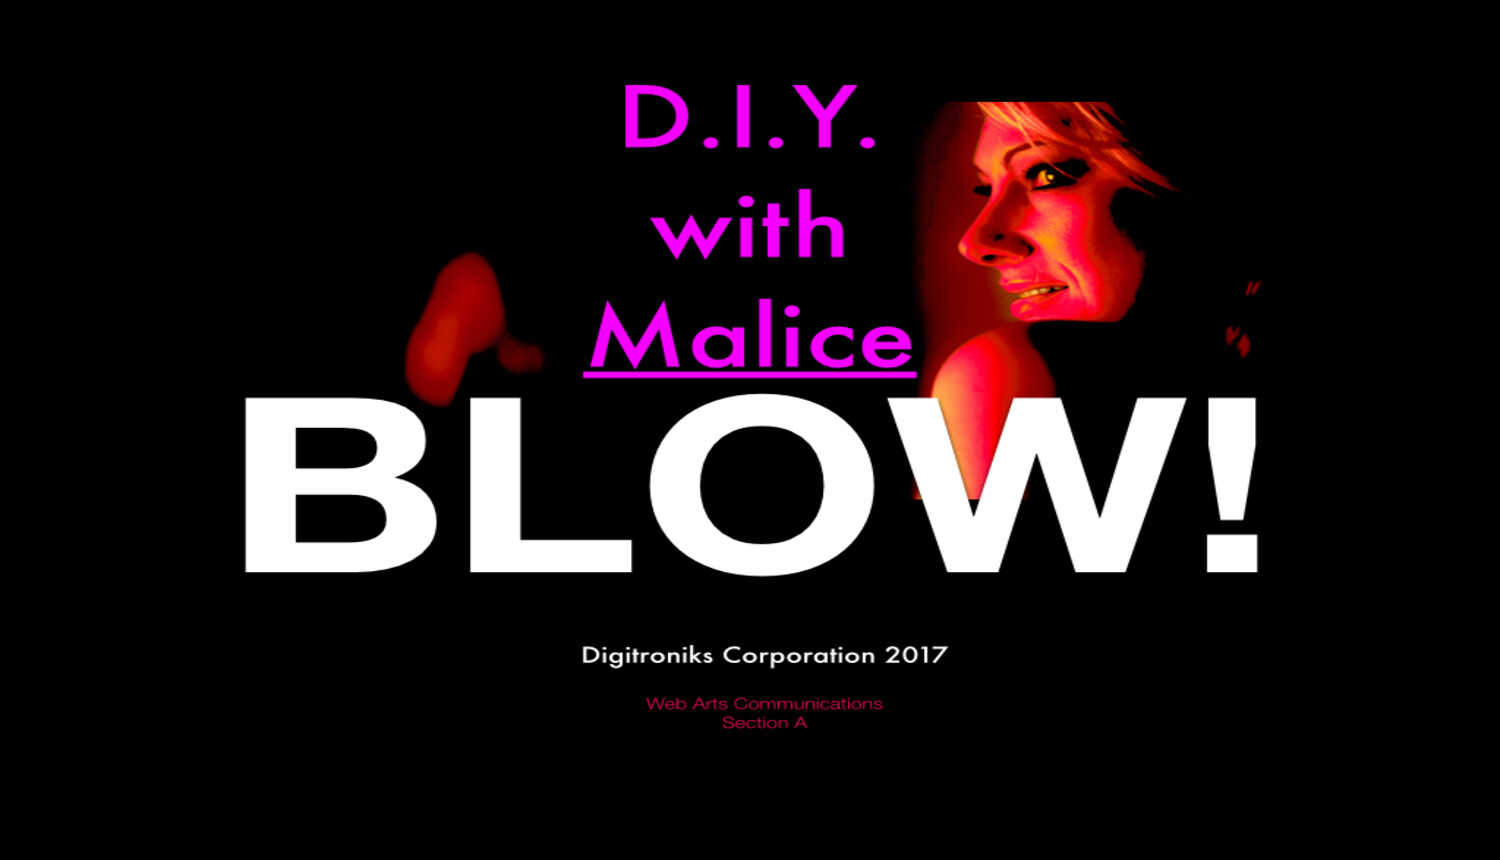 D.I.Y. with Malice - "BLOW!" White Dolphin Records